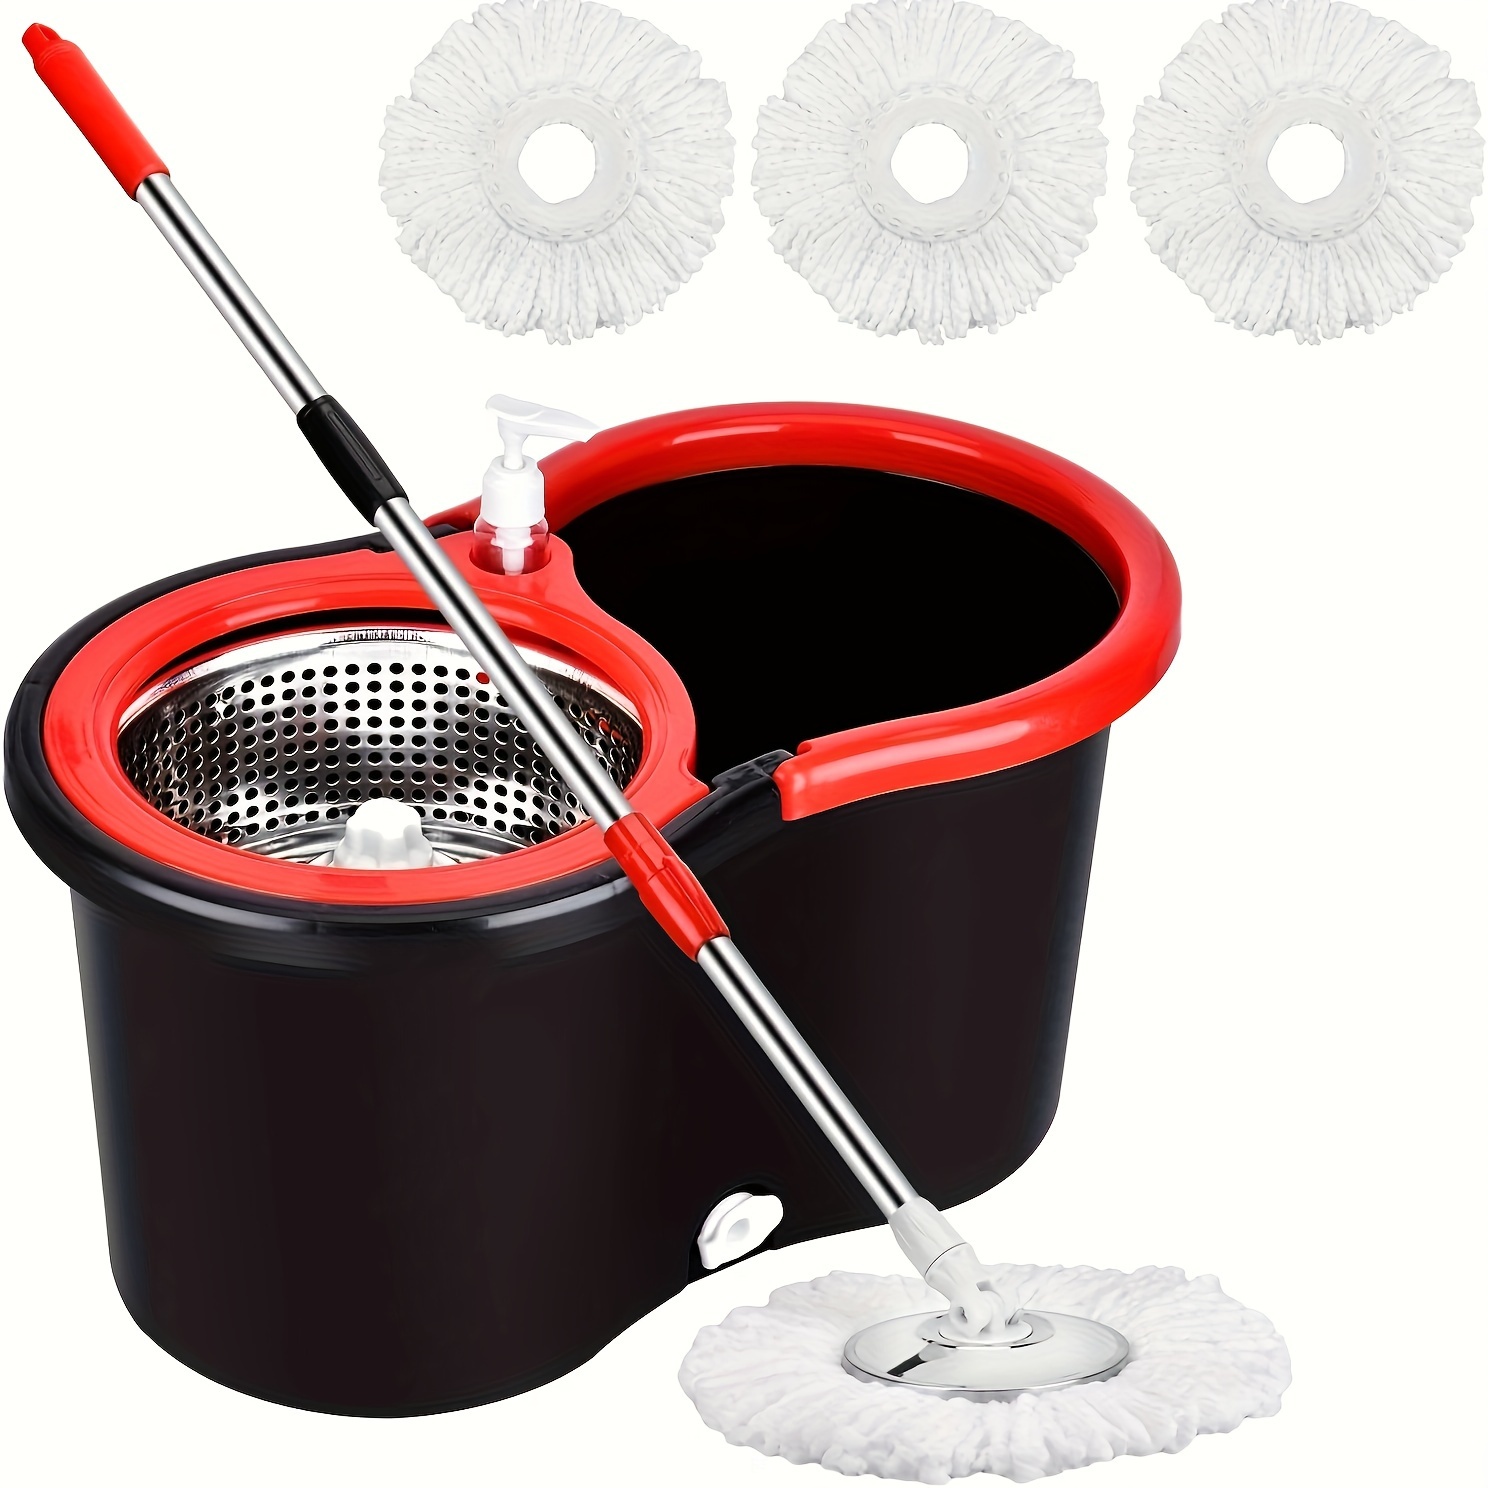 

Mop And Bucket With Wringer Set, Bathroom Mop Bucket, 360-degree Spin Mop And Bucket With 3 Replacement Heads